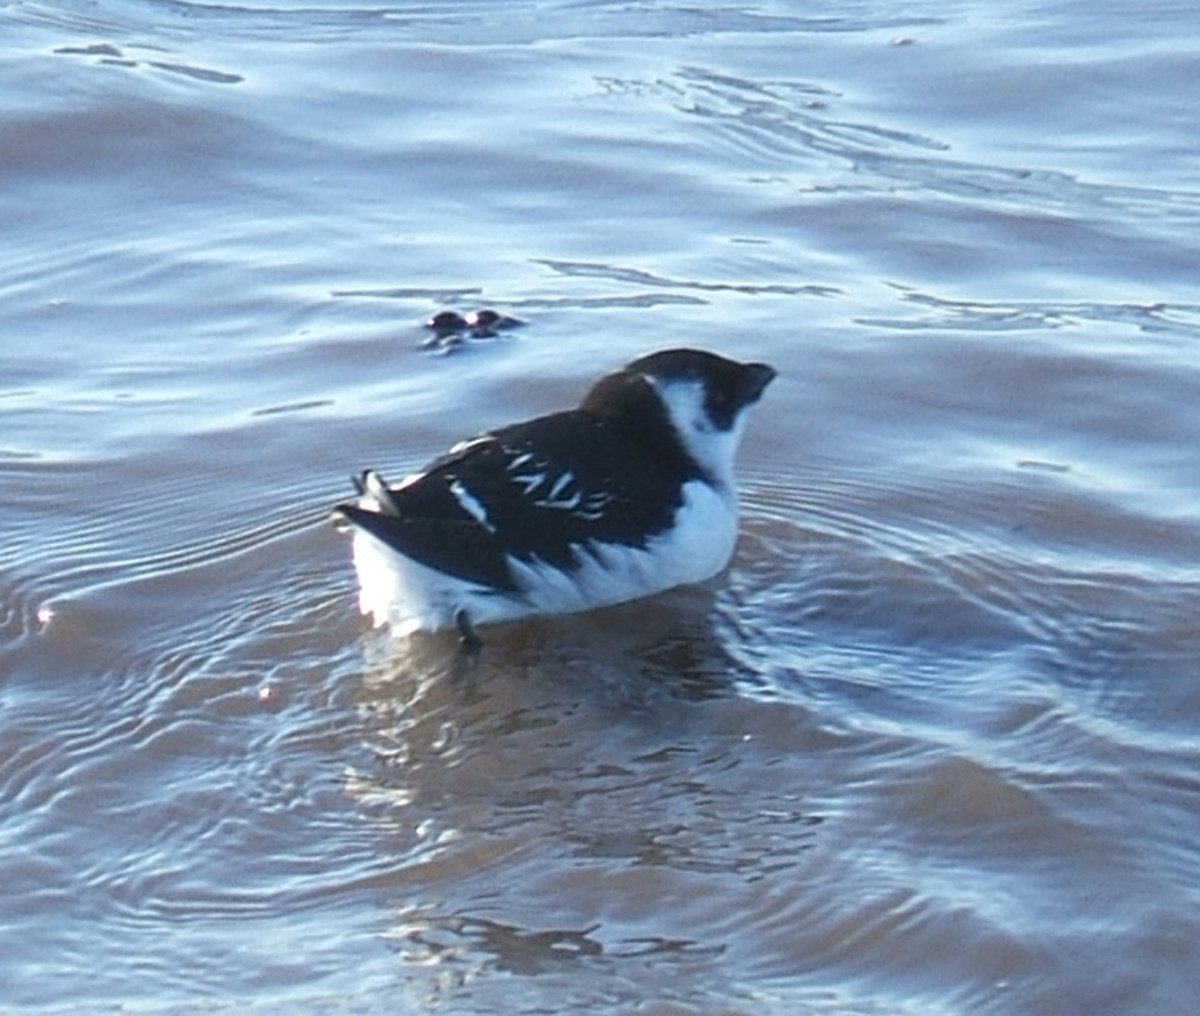 A photograph of a winter plumaged Little Auk similar to the one that flew past my position at Bluebell Car Park. Source: Public Domain